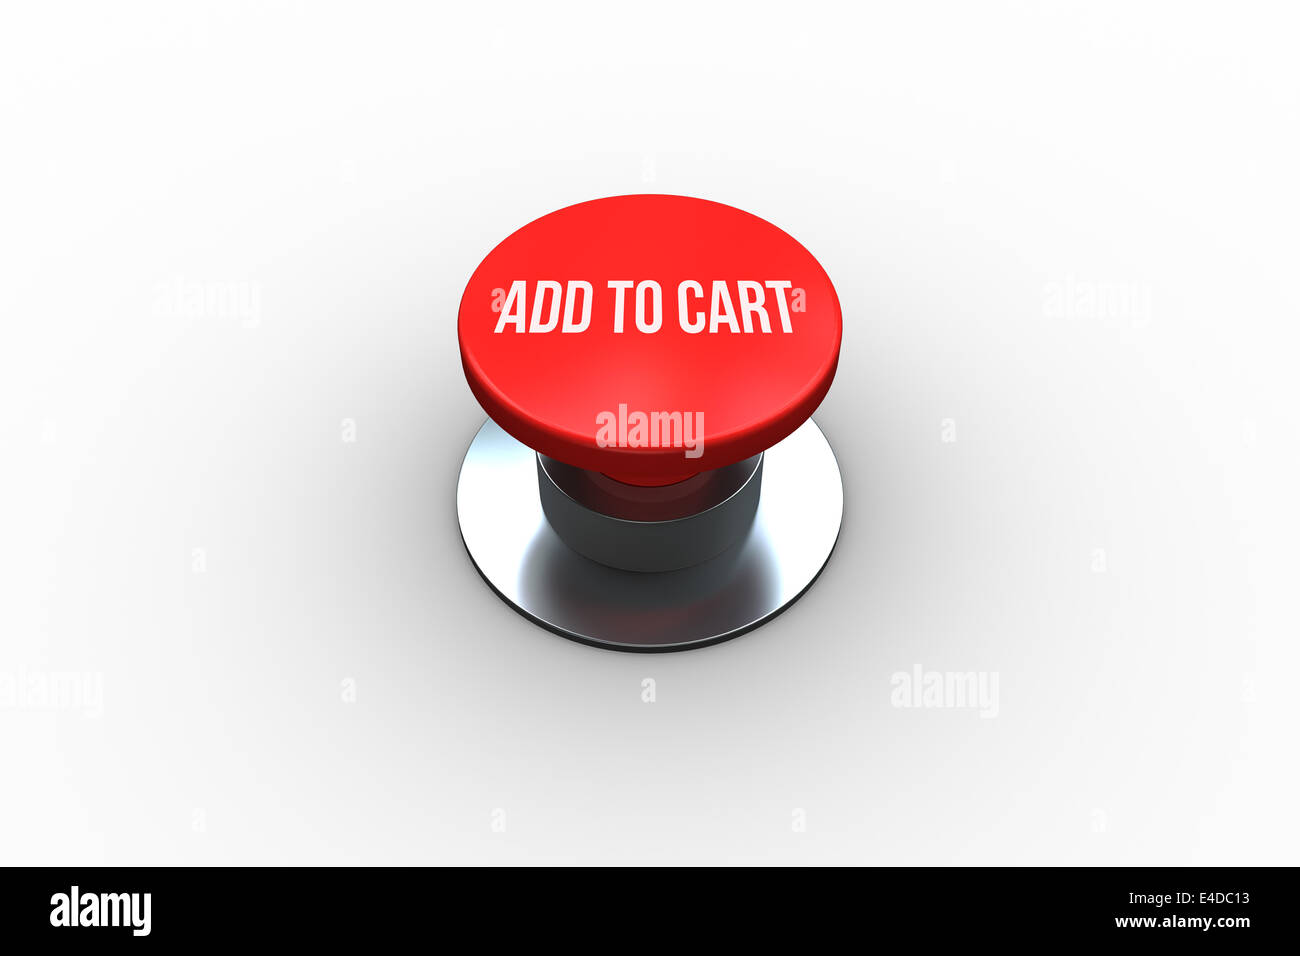 Add to cart on digitally generated red push button Stock Photo